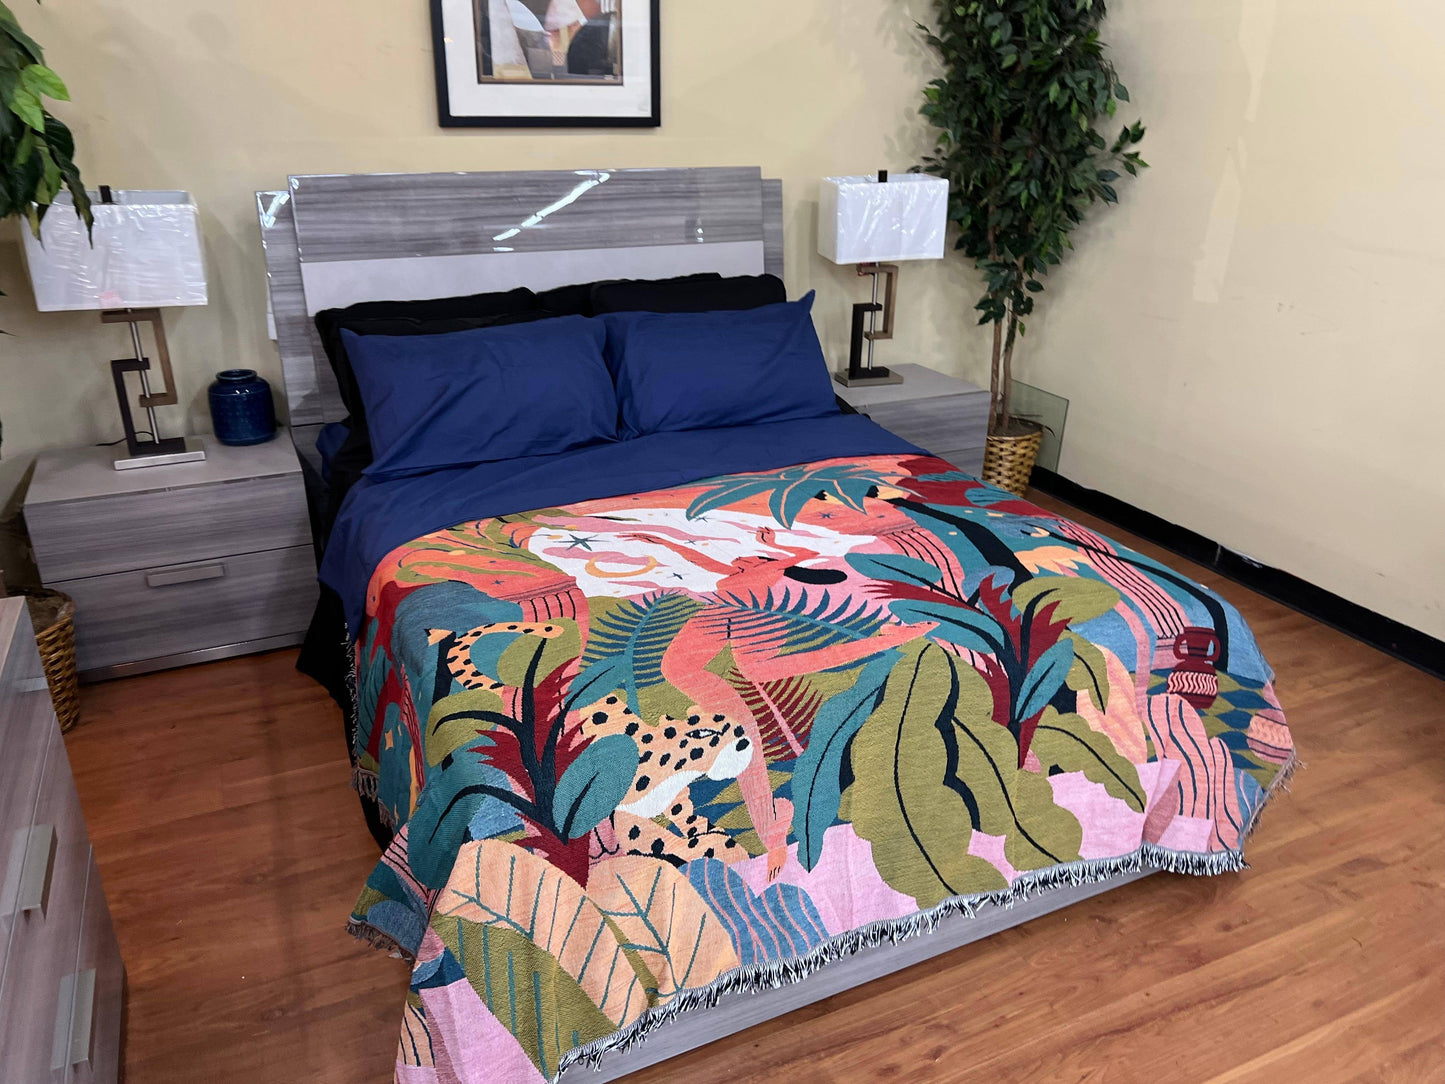 Forest Dancer Throw Blanket -130x160cm Vibrant rainforest illustration with dancing woman and leopard. Lightweight and durable polyester/cotton blend - Fluffyslip